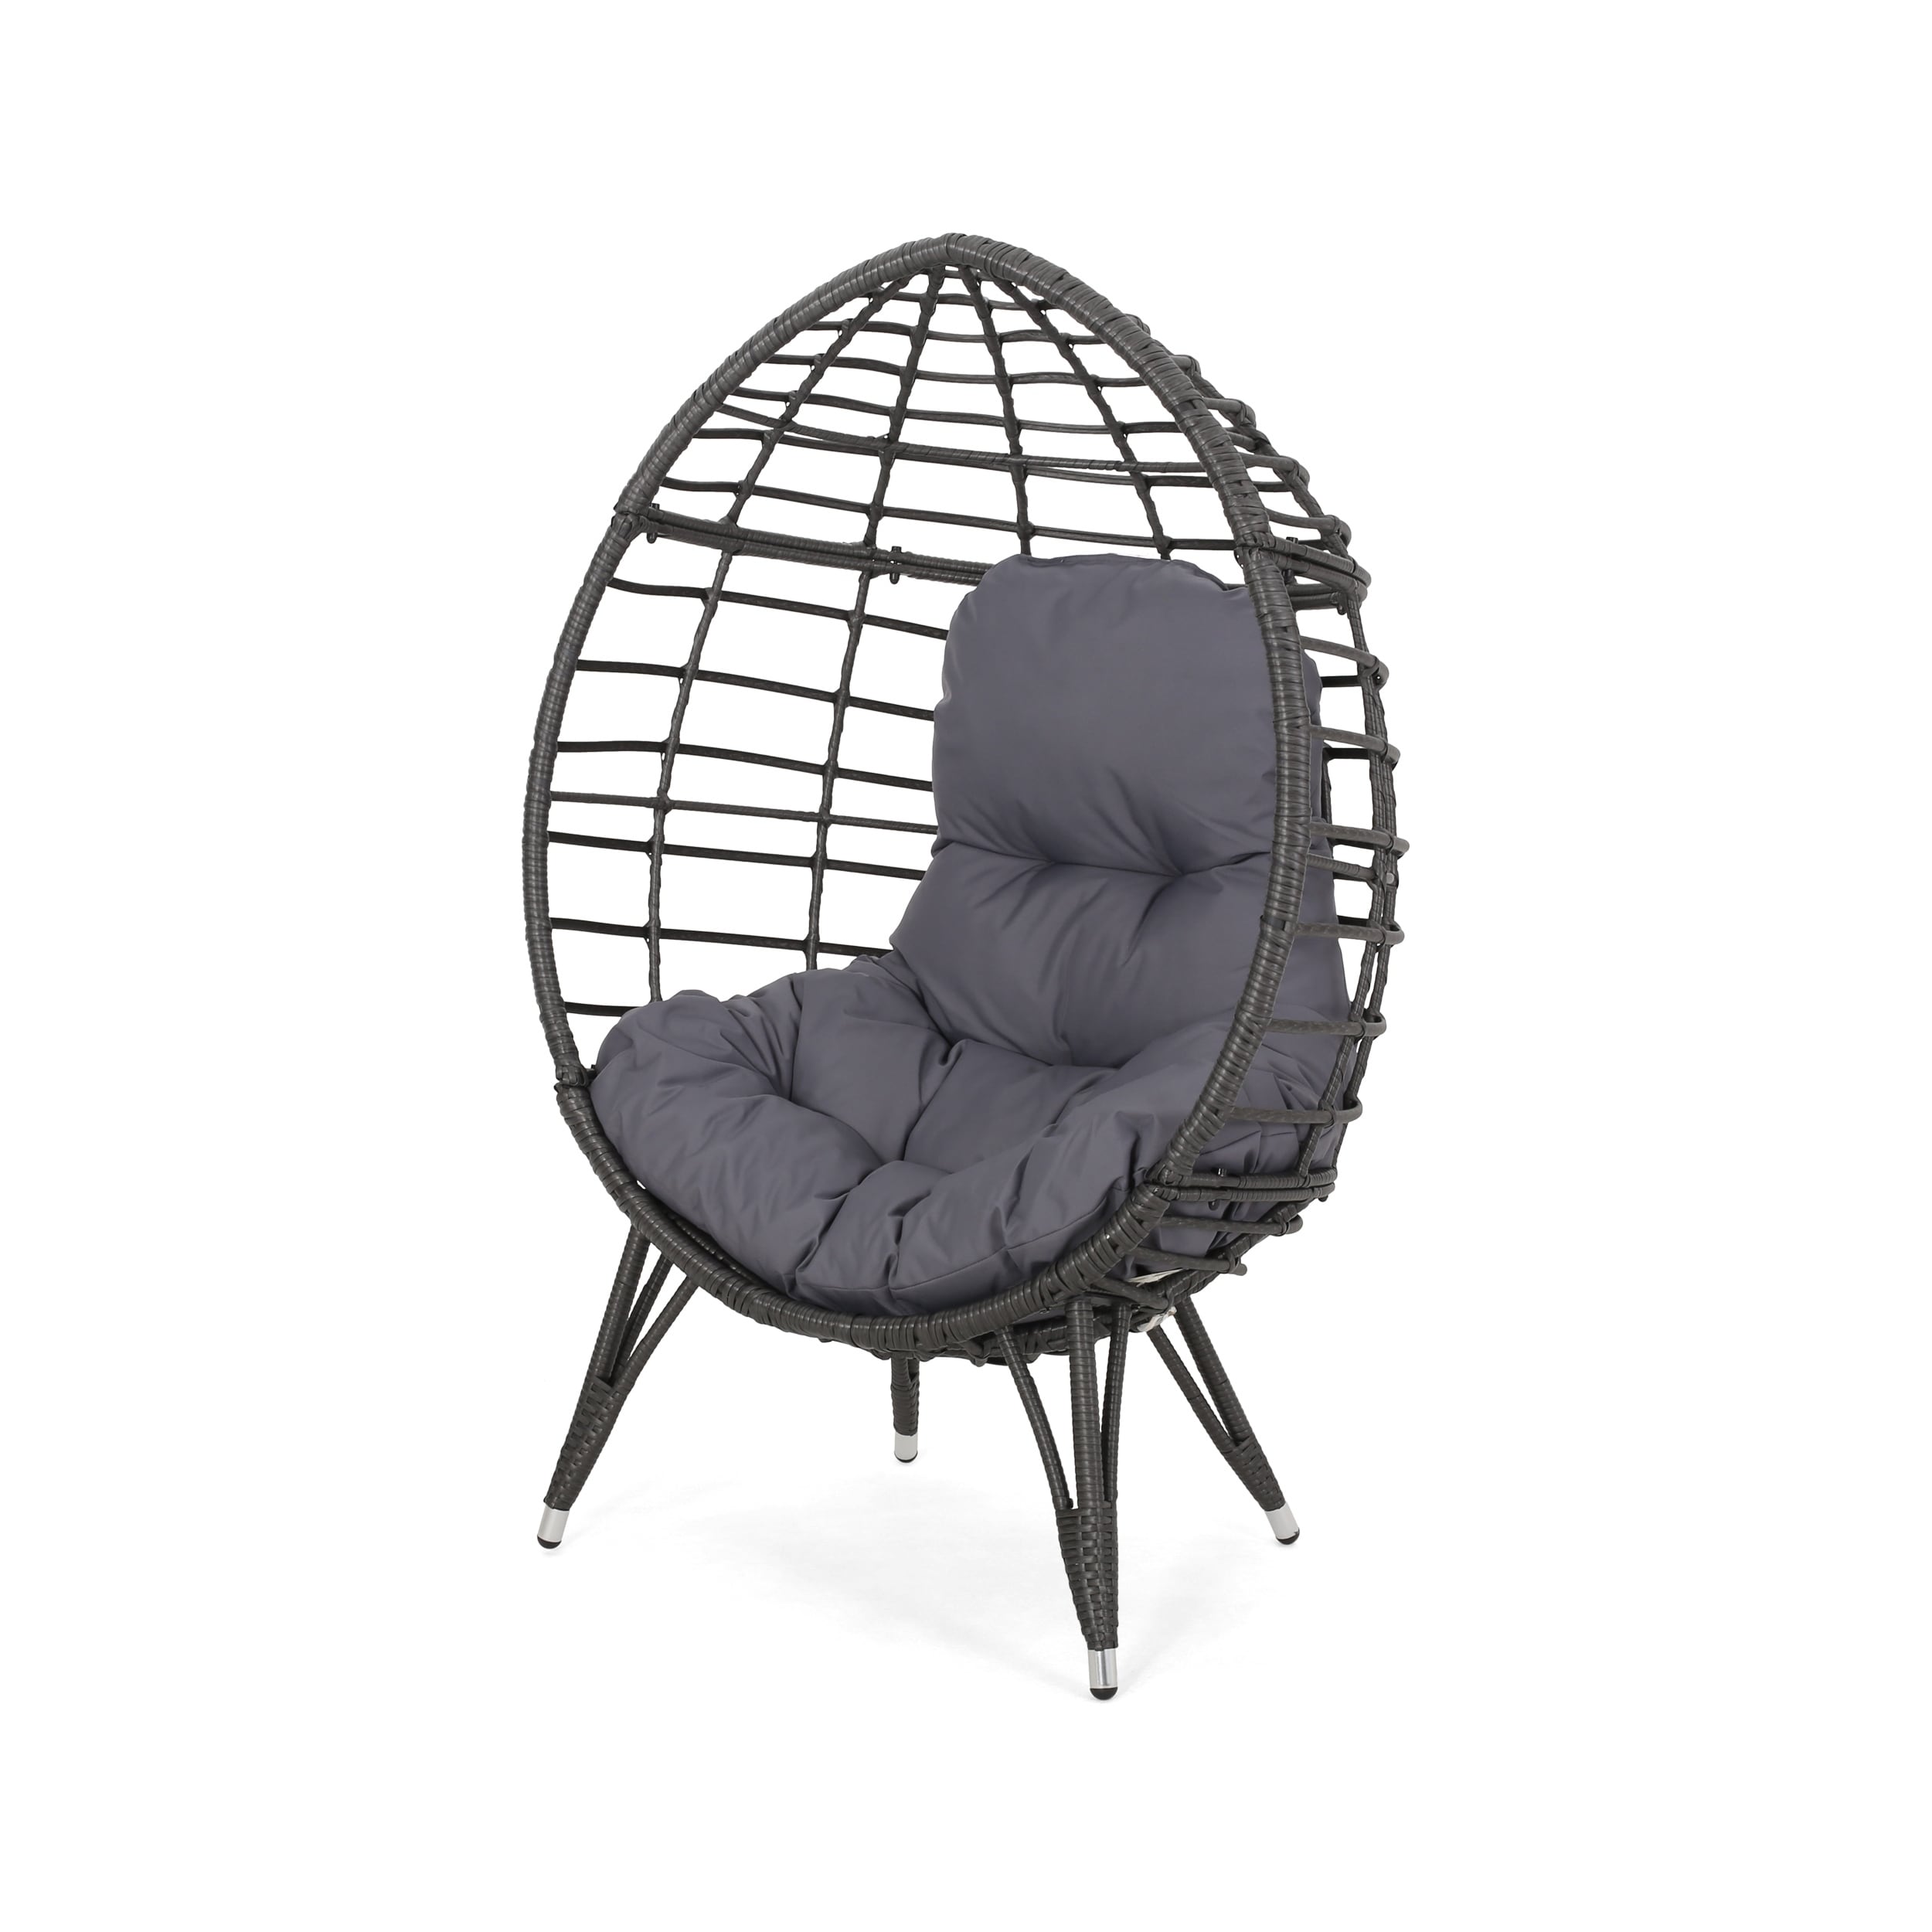 Santino Outdoor Wicker Teardrop Chair With Cushion By Christopher Knight Home - 29.50 W X 38.50 D X 58.00 H